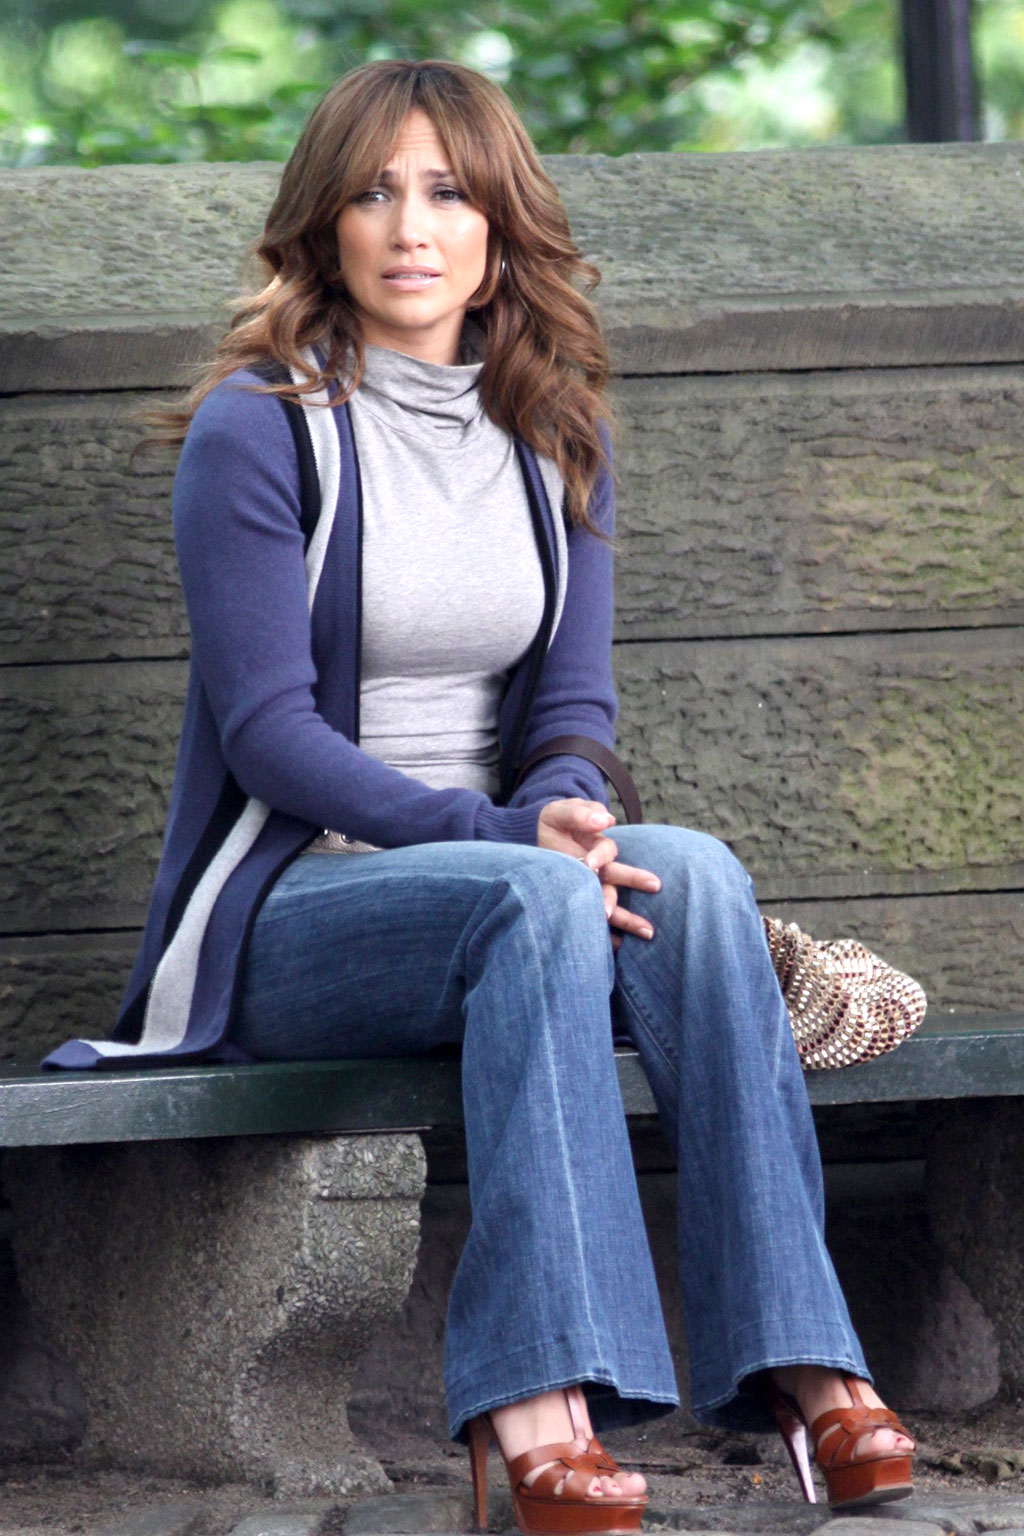 Jennifer Lopez at the Location For THE BACK-UP PLAN ON July 22, 2009 on the Streets of Manhattan, NY 